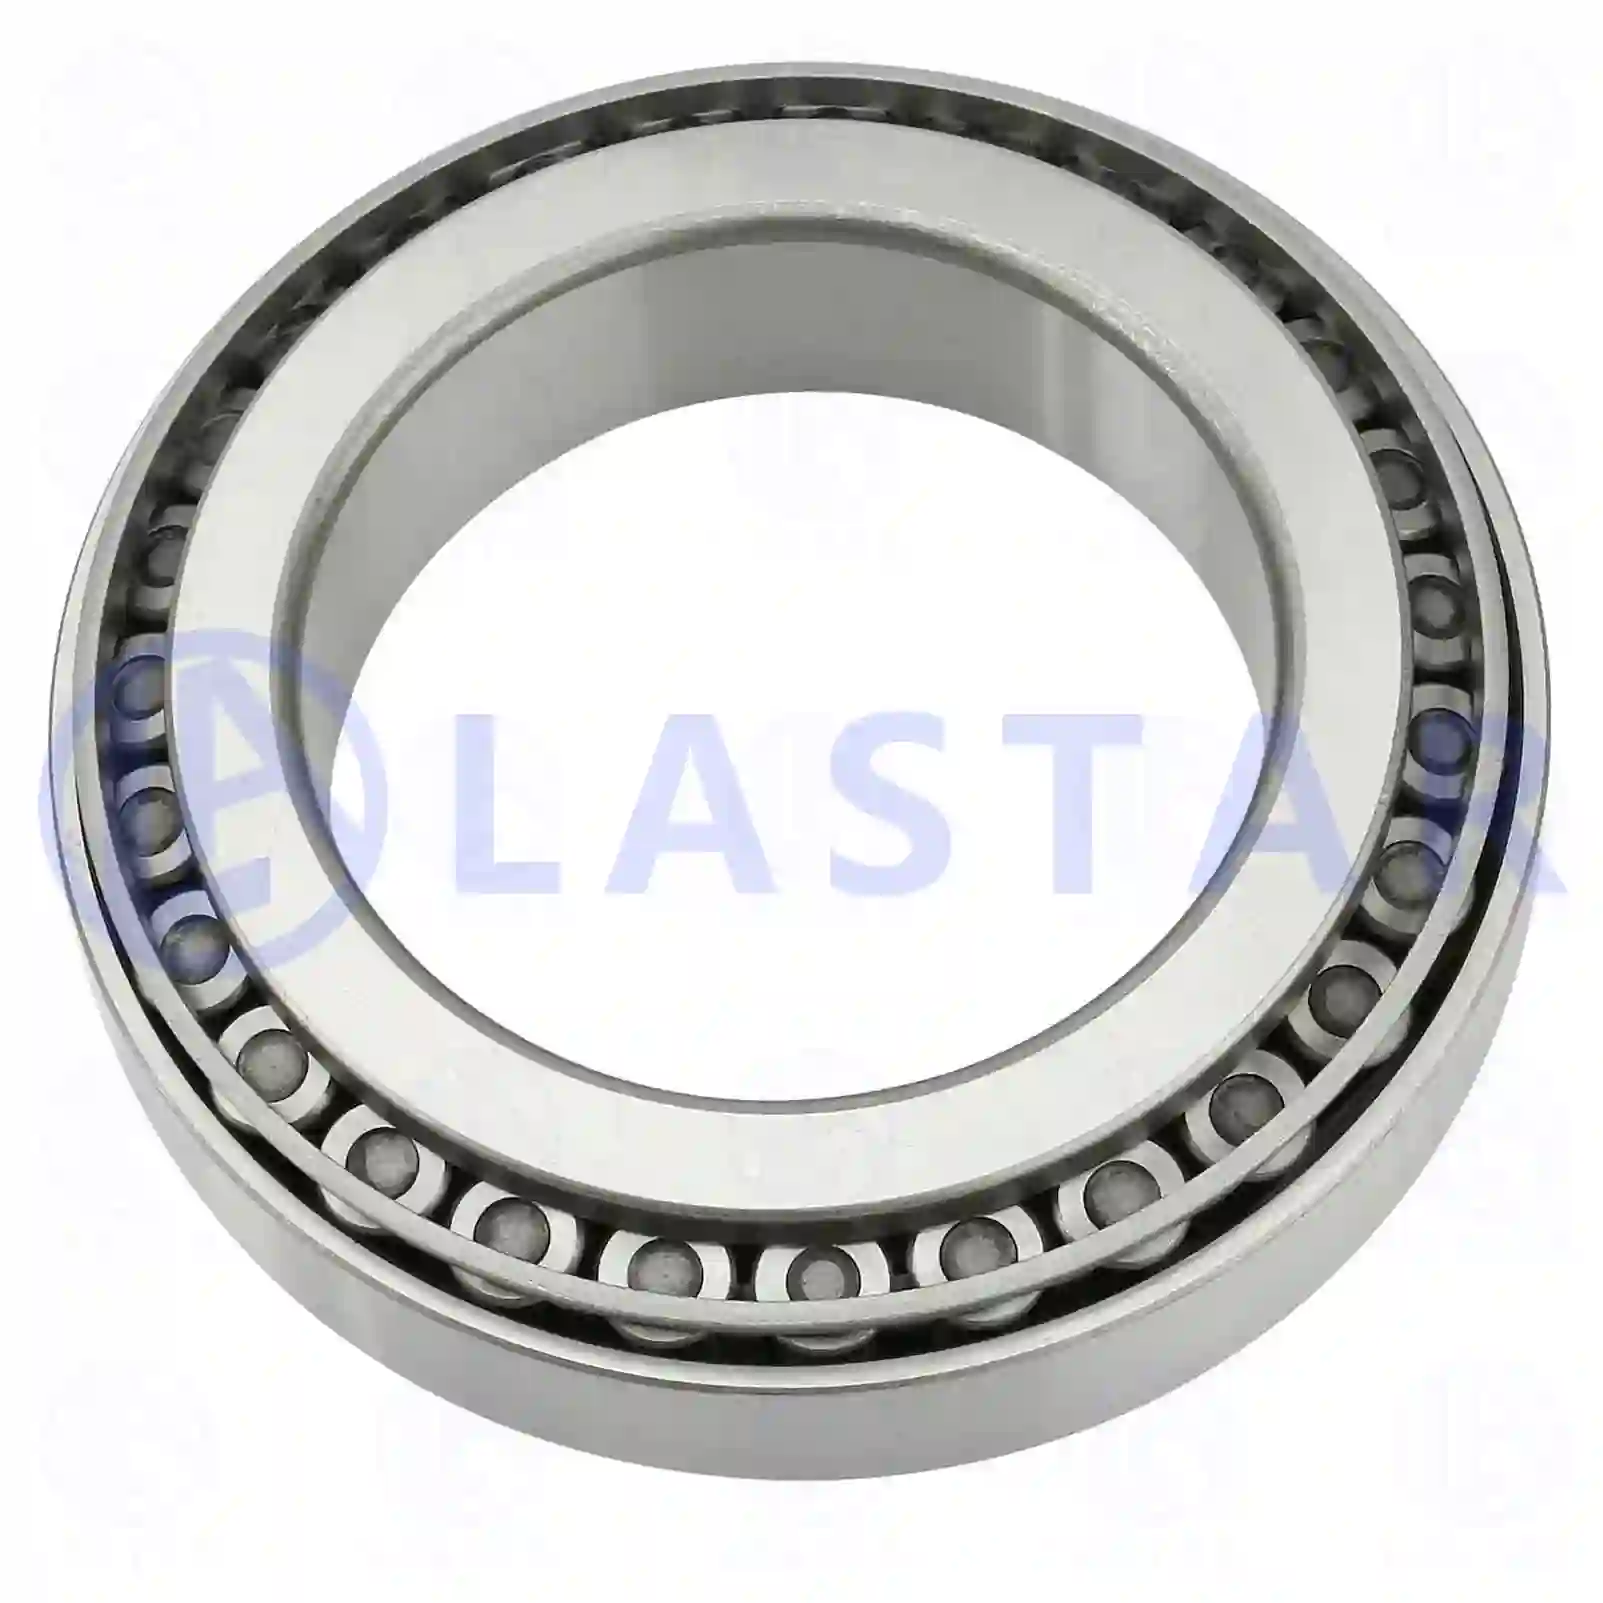 Tapered roller bearing, 77724636, 1040270, 005090762, UNR2000010, 5000786292, 7401524061, 1301682, 1400270, 326826, 1524061, ZG02972-0008 ||  77724636 Lastar Spare Part | Truck Spare Parts, Auotomotive Spare Parts Tapered roller bearing, 77724636, 1040270, 005090762, UNR2000010, 5000786292, 7401524061, 1301682, 1400270, 326826, 1524061, ZG02972-0008 ||  77724636 Lastar Spare Part | Truck Spare Parts, Auotomotive Spare Parts